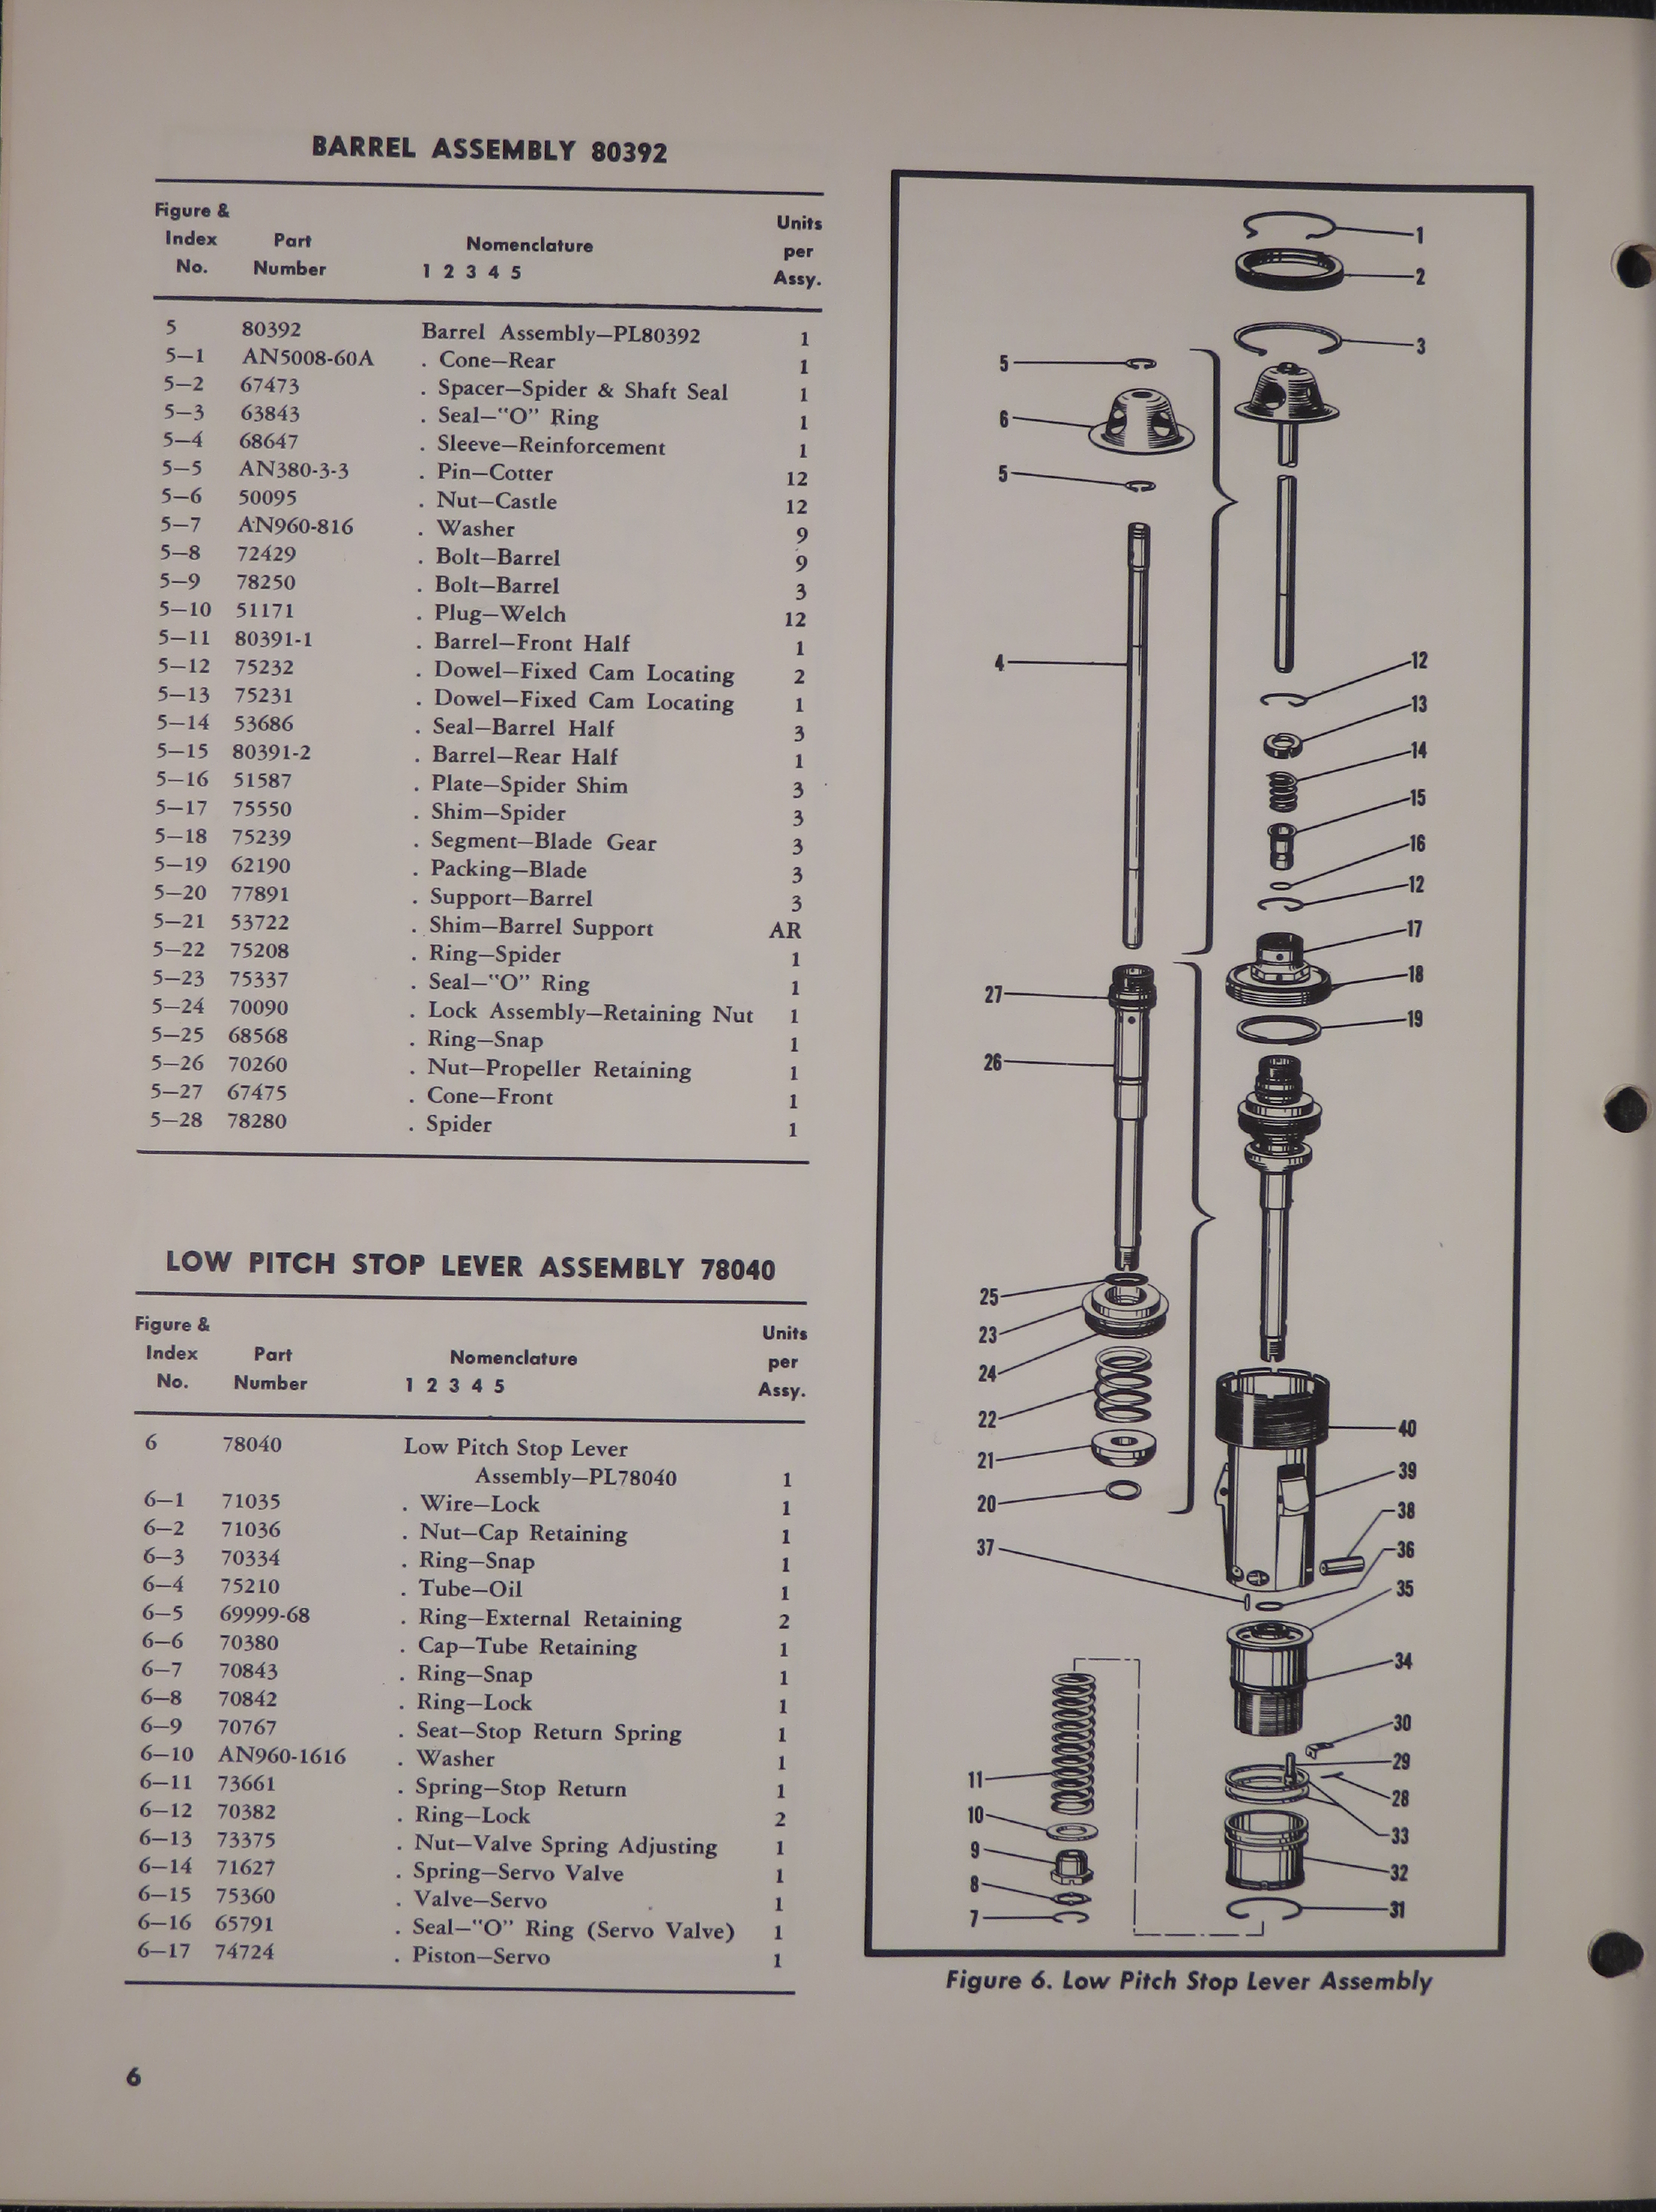 Sample page 8 from AirCorps Library document: Parts Catalog for Hydromatic Propeller Equipment for Martin 404